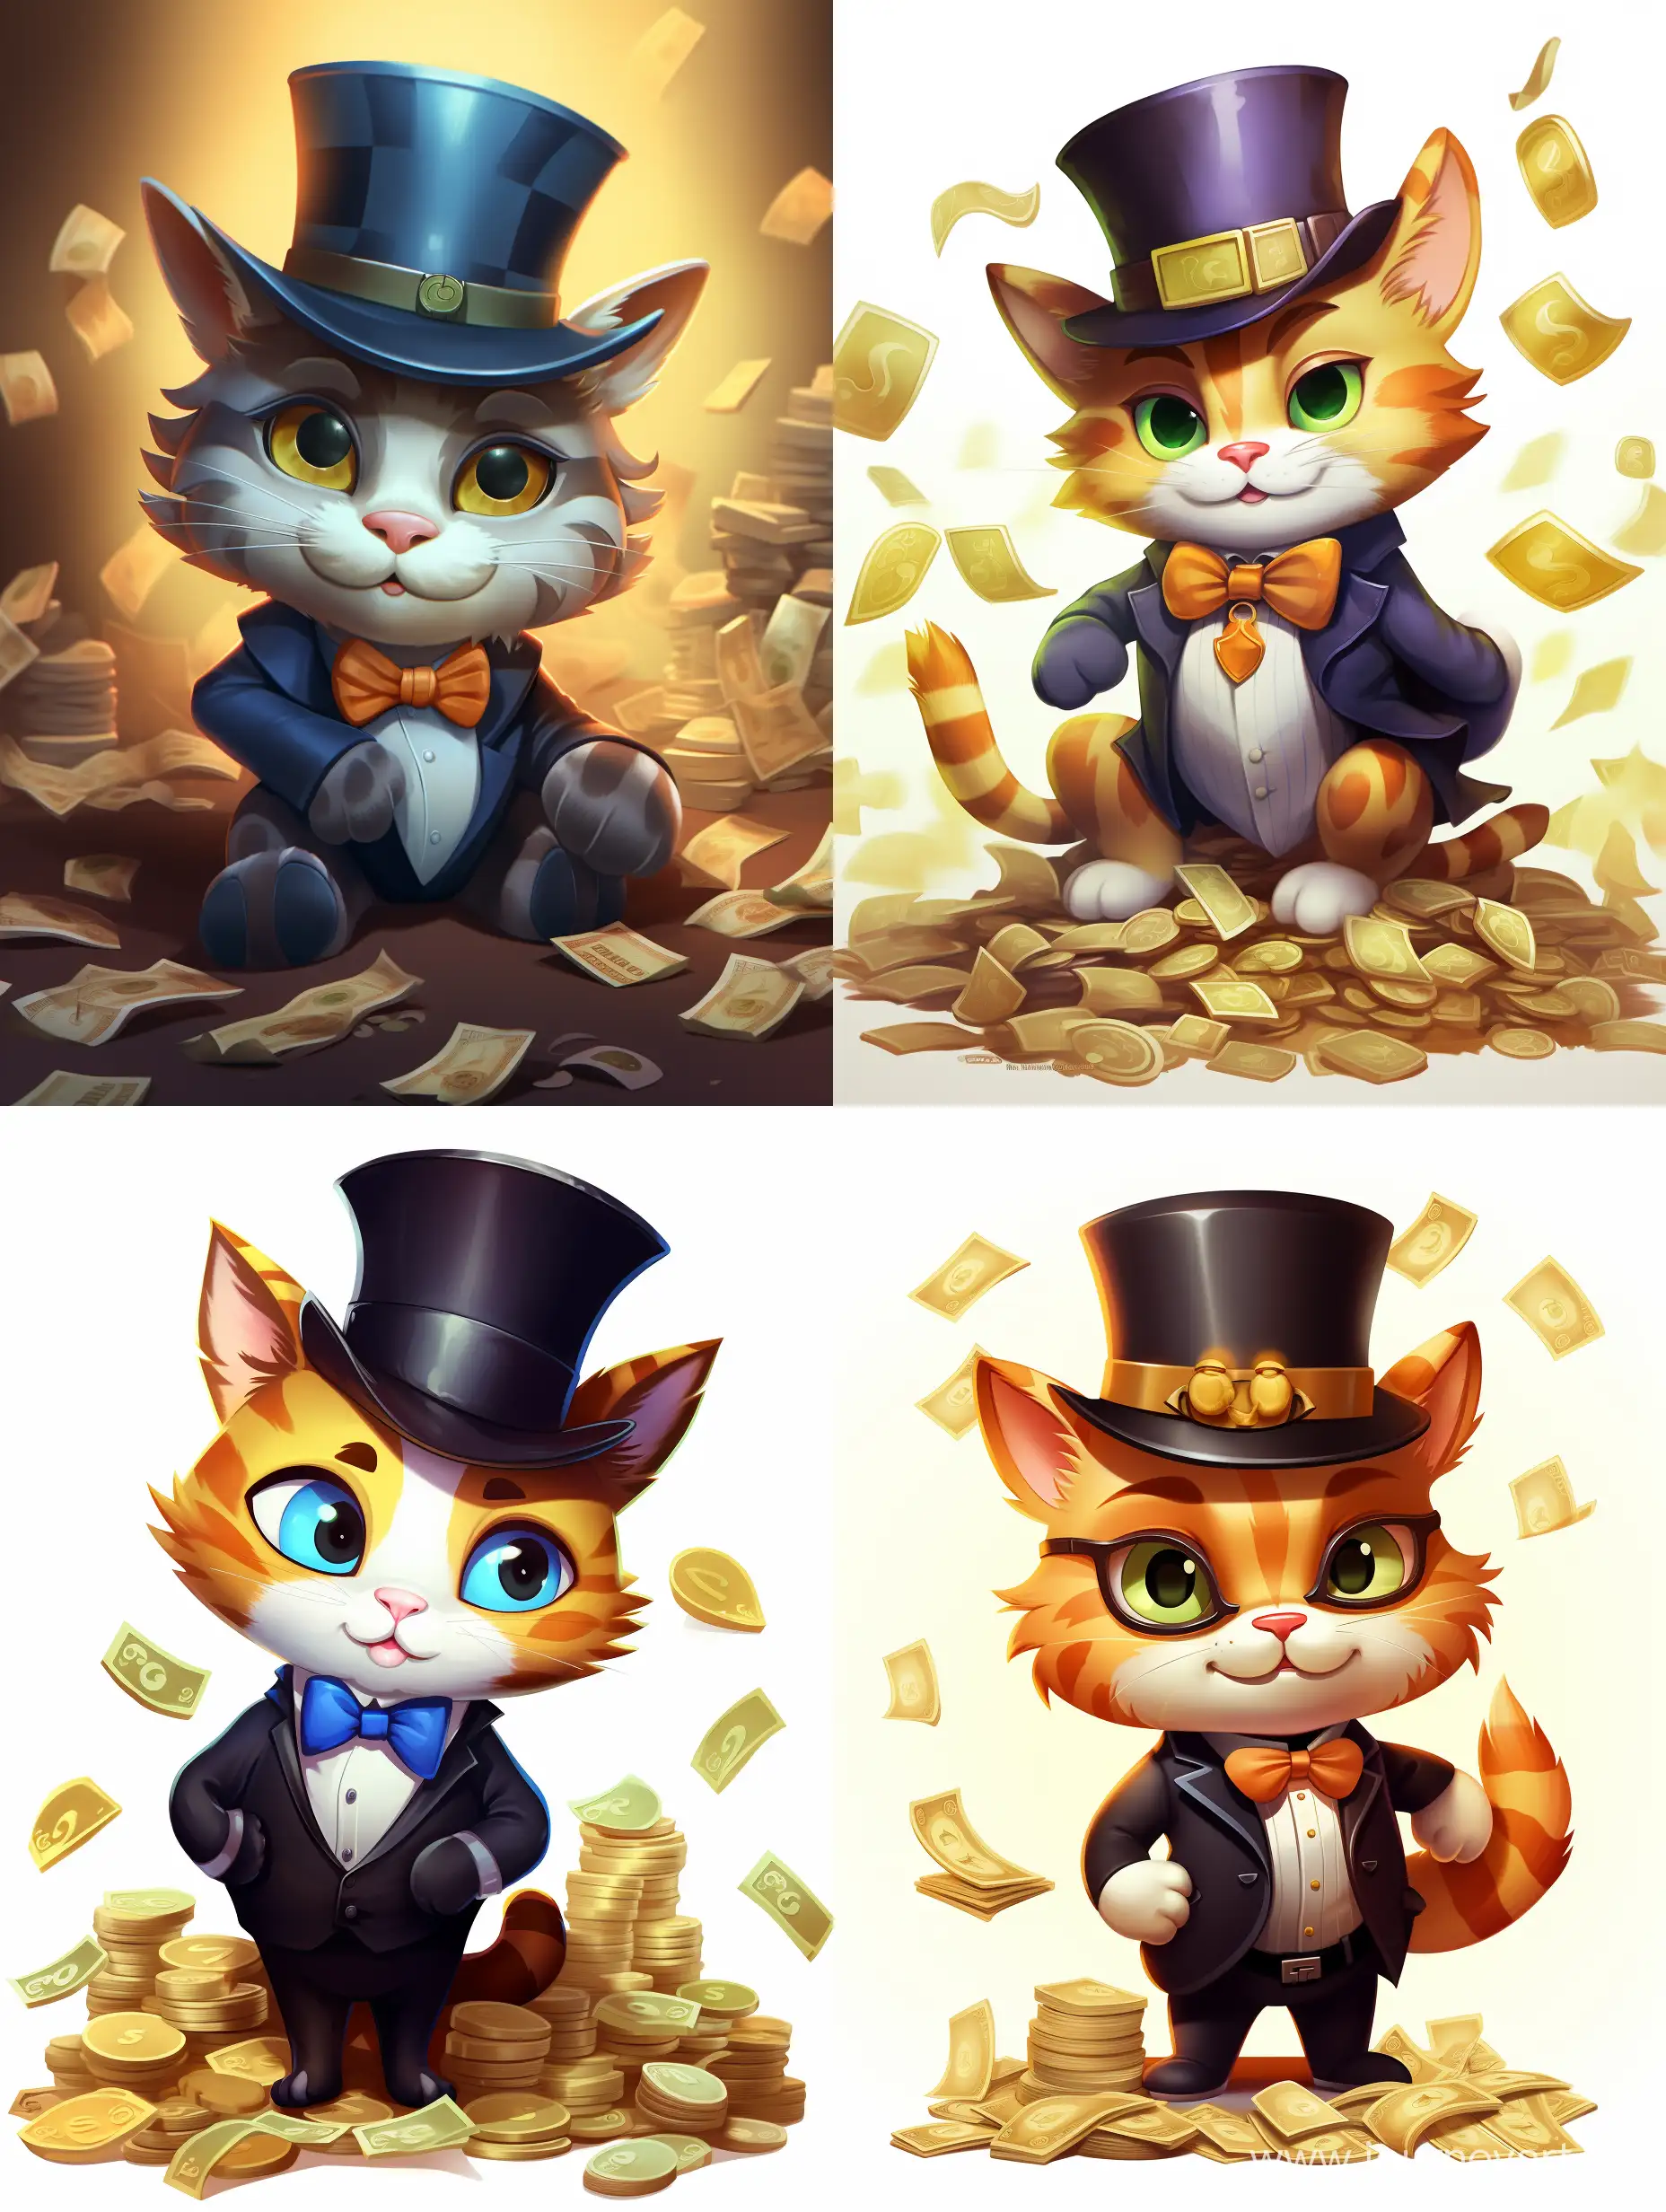 Adorable-Cat-in-Business-Attire-Tossing-Money-and-Coins